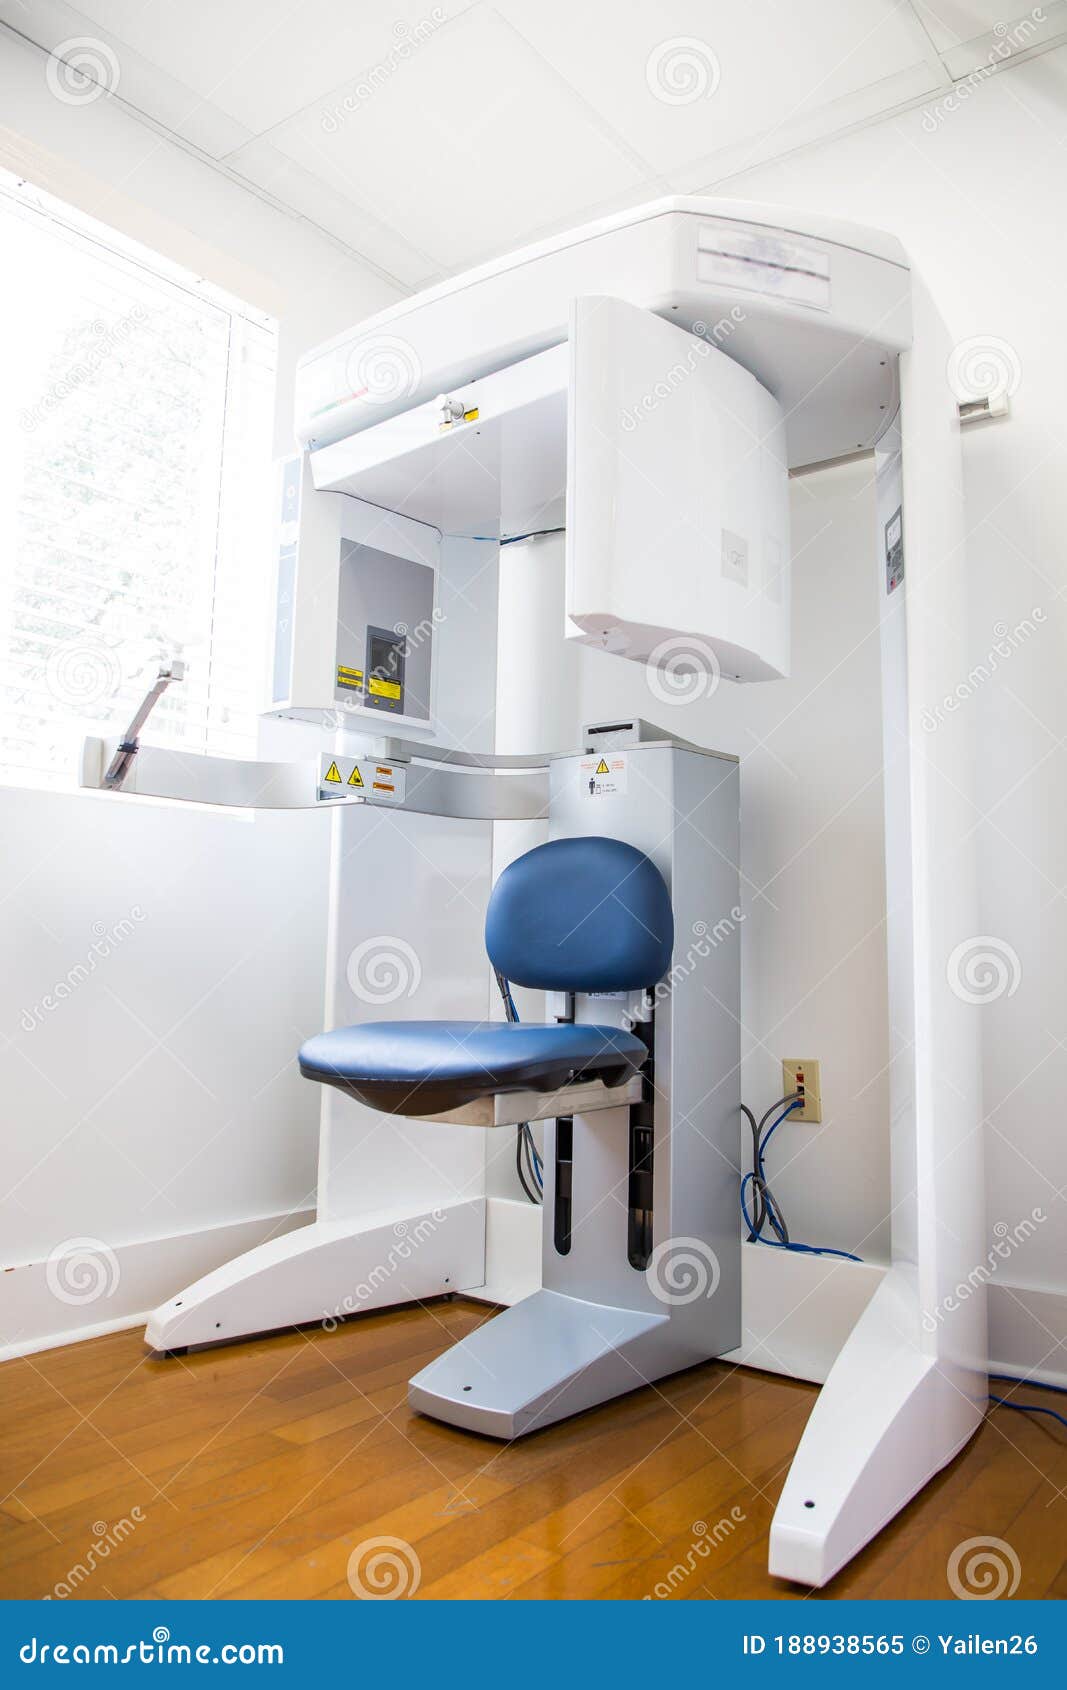 cone beam ct scanner machine cbct 3d xray for face maxilla jaw mandible radiograph three dimensional